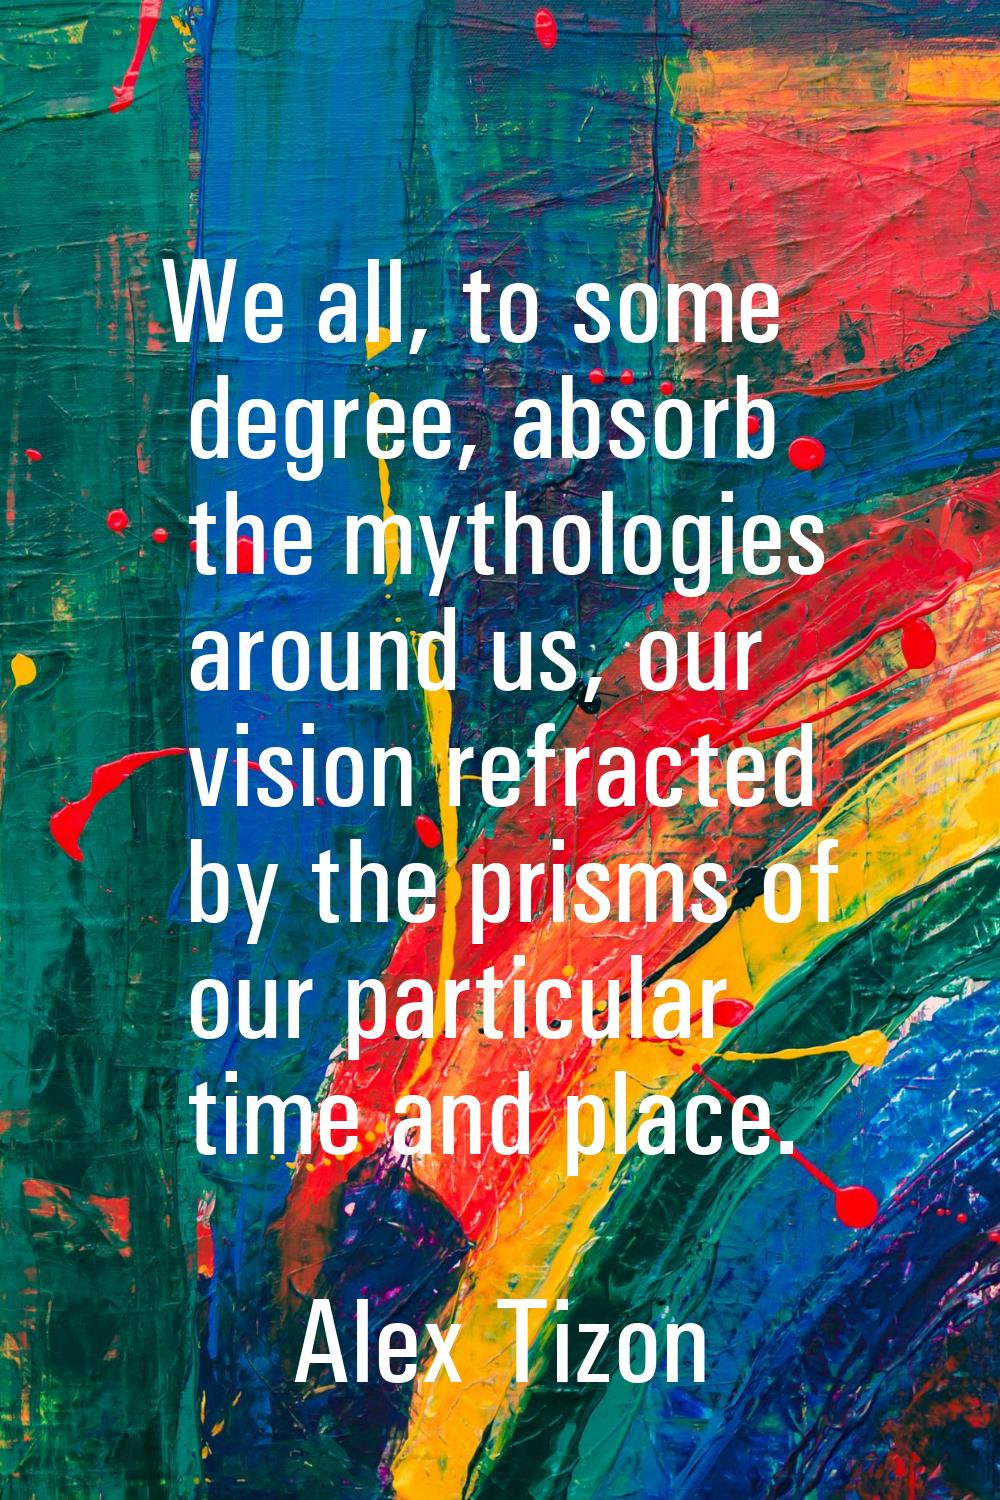 We all, to some degree, absorb the mythologies around us, our vision refracted by the prisms of our